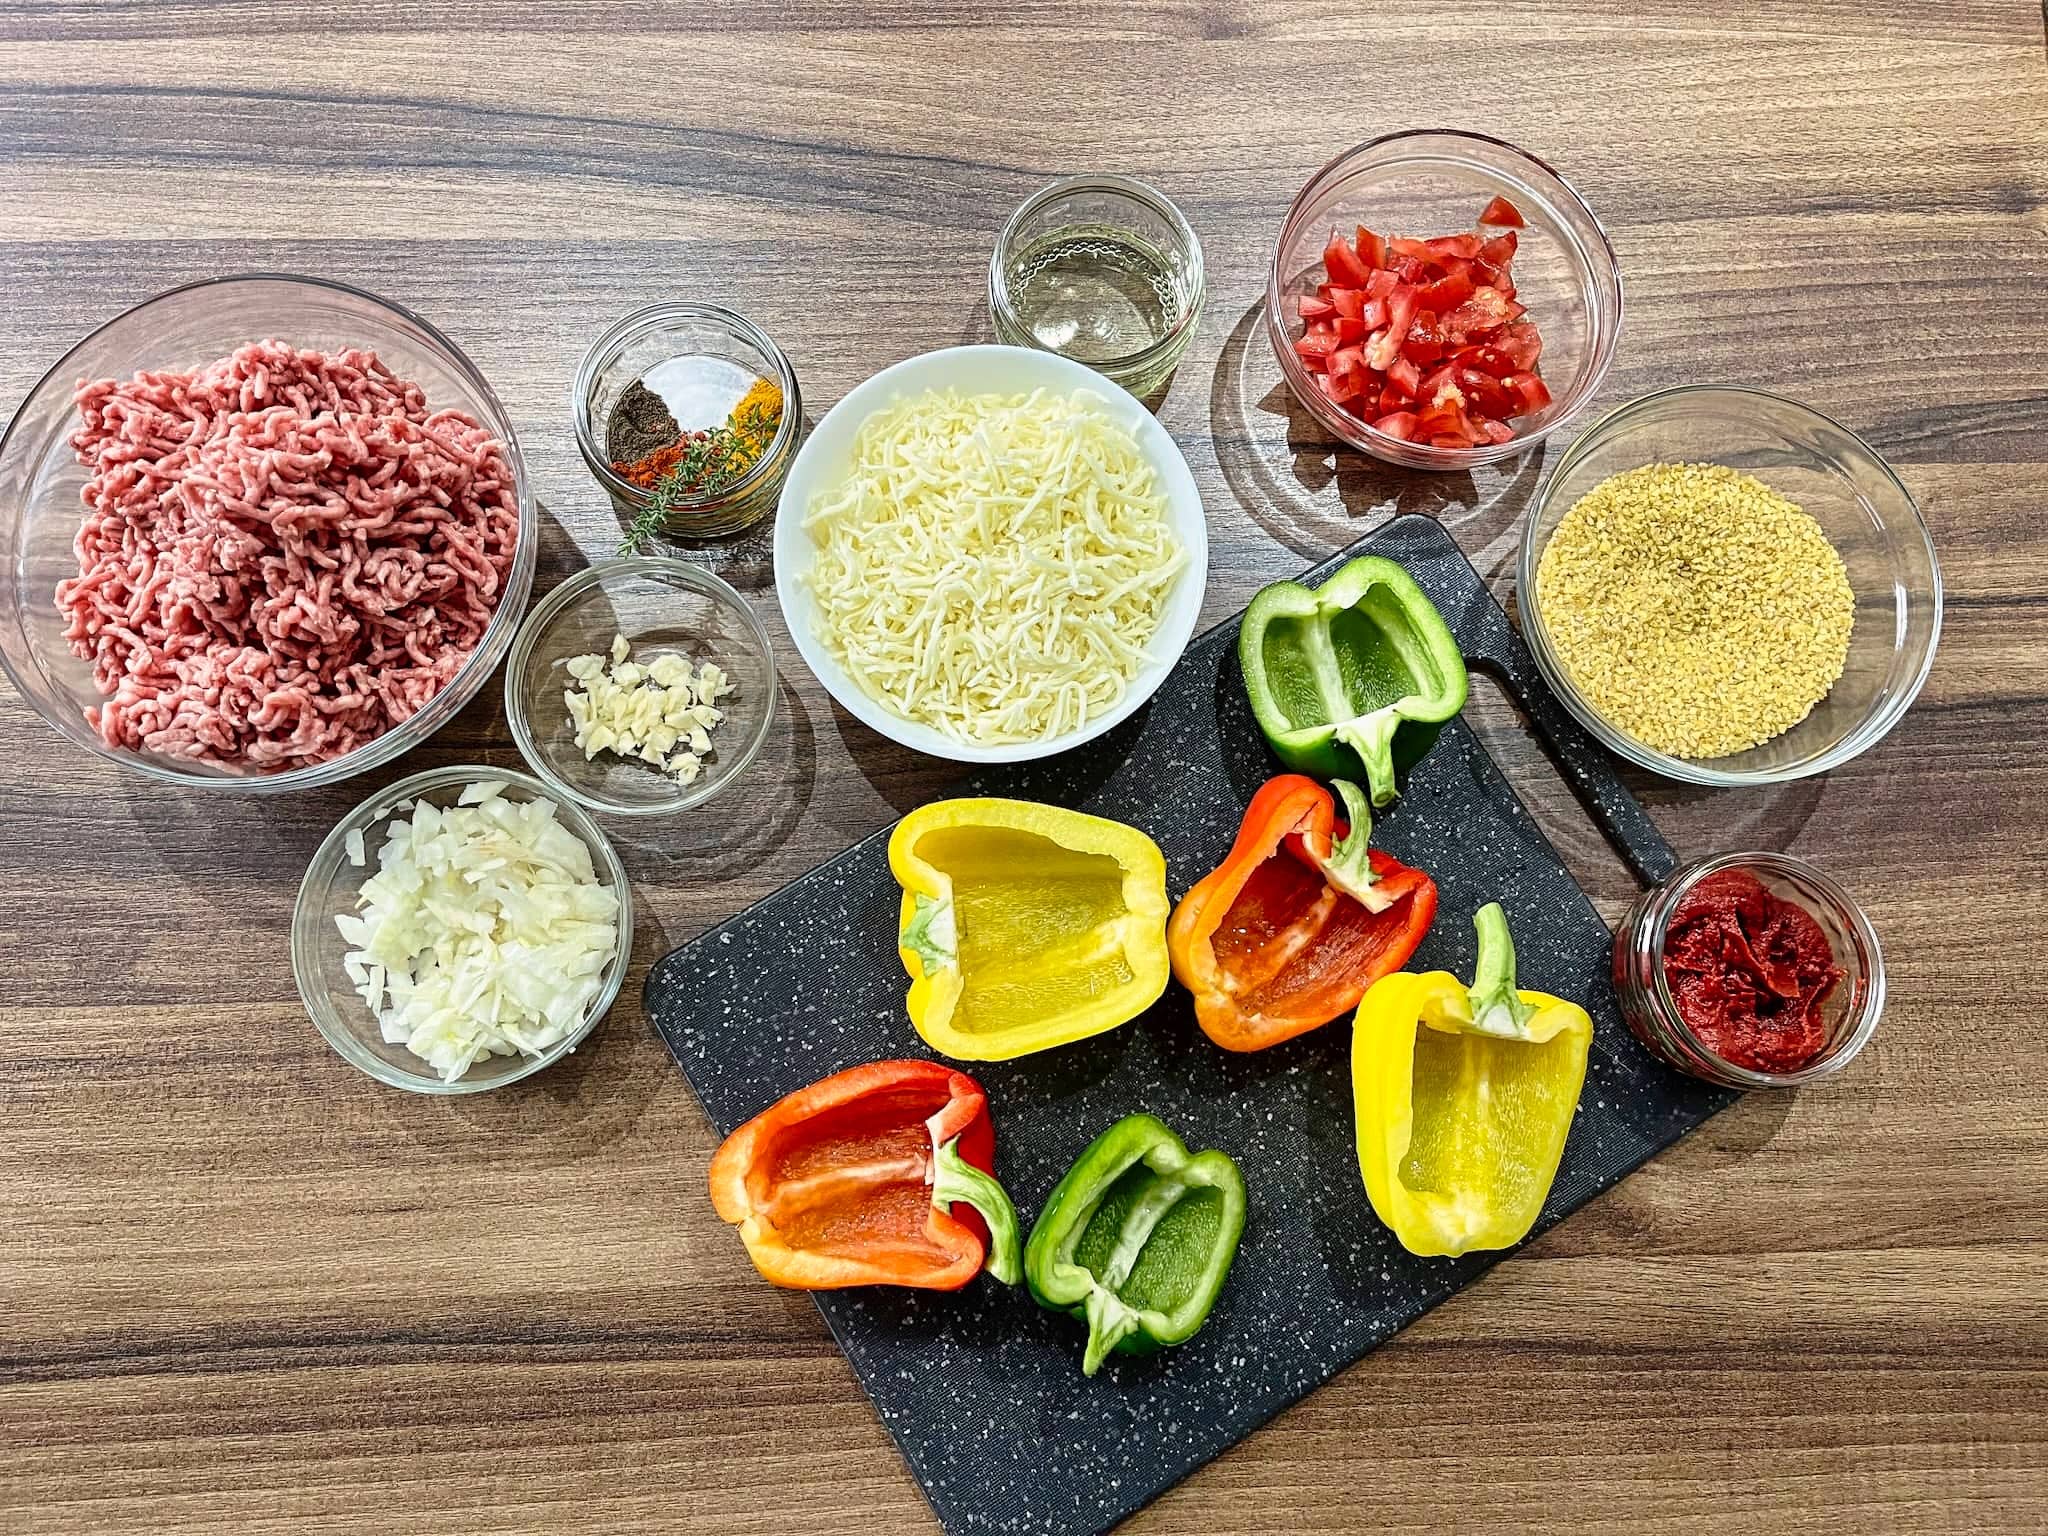 All the ingredients ready on a table top to make stuffed peppers